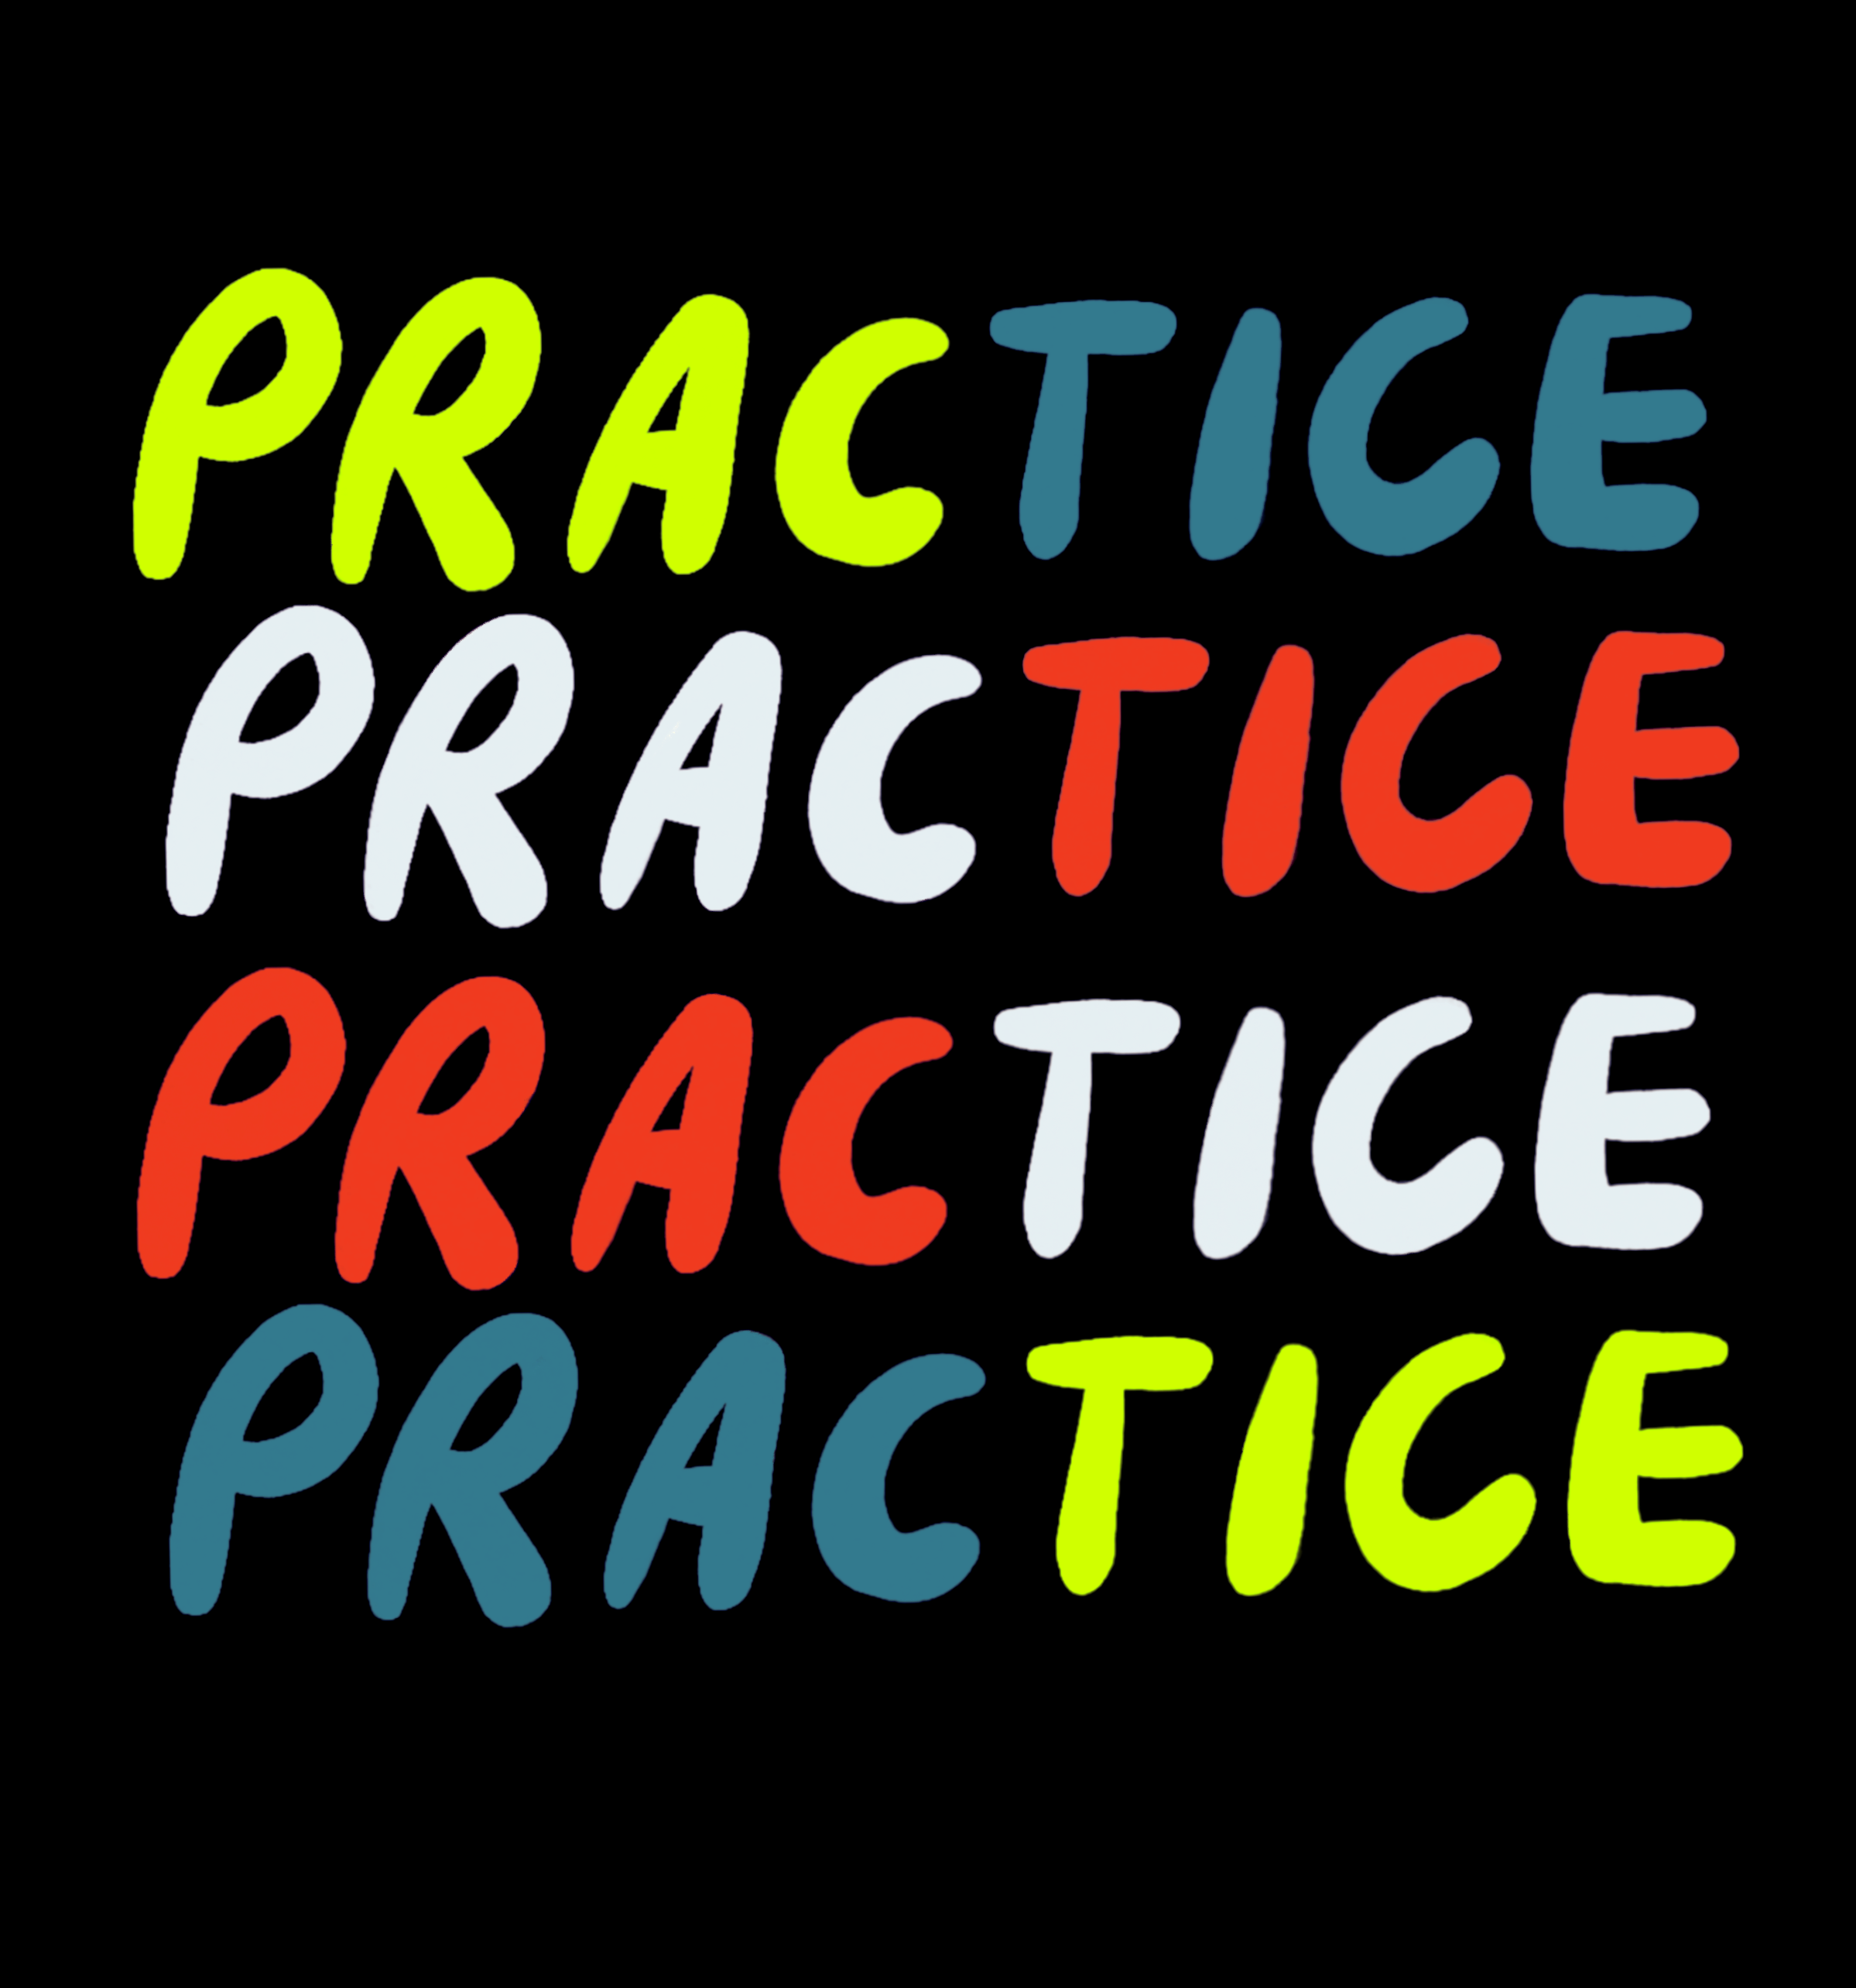 The words "Practice Practice" are stacked on top of each other in various colors.